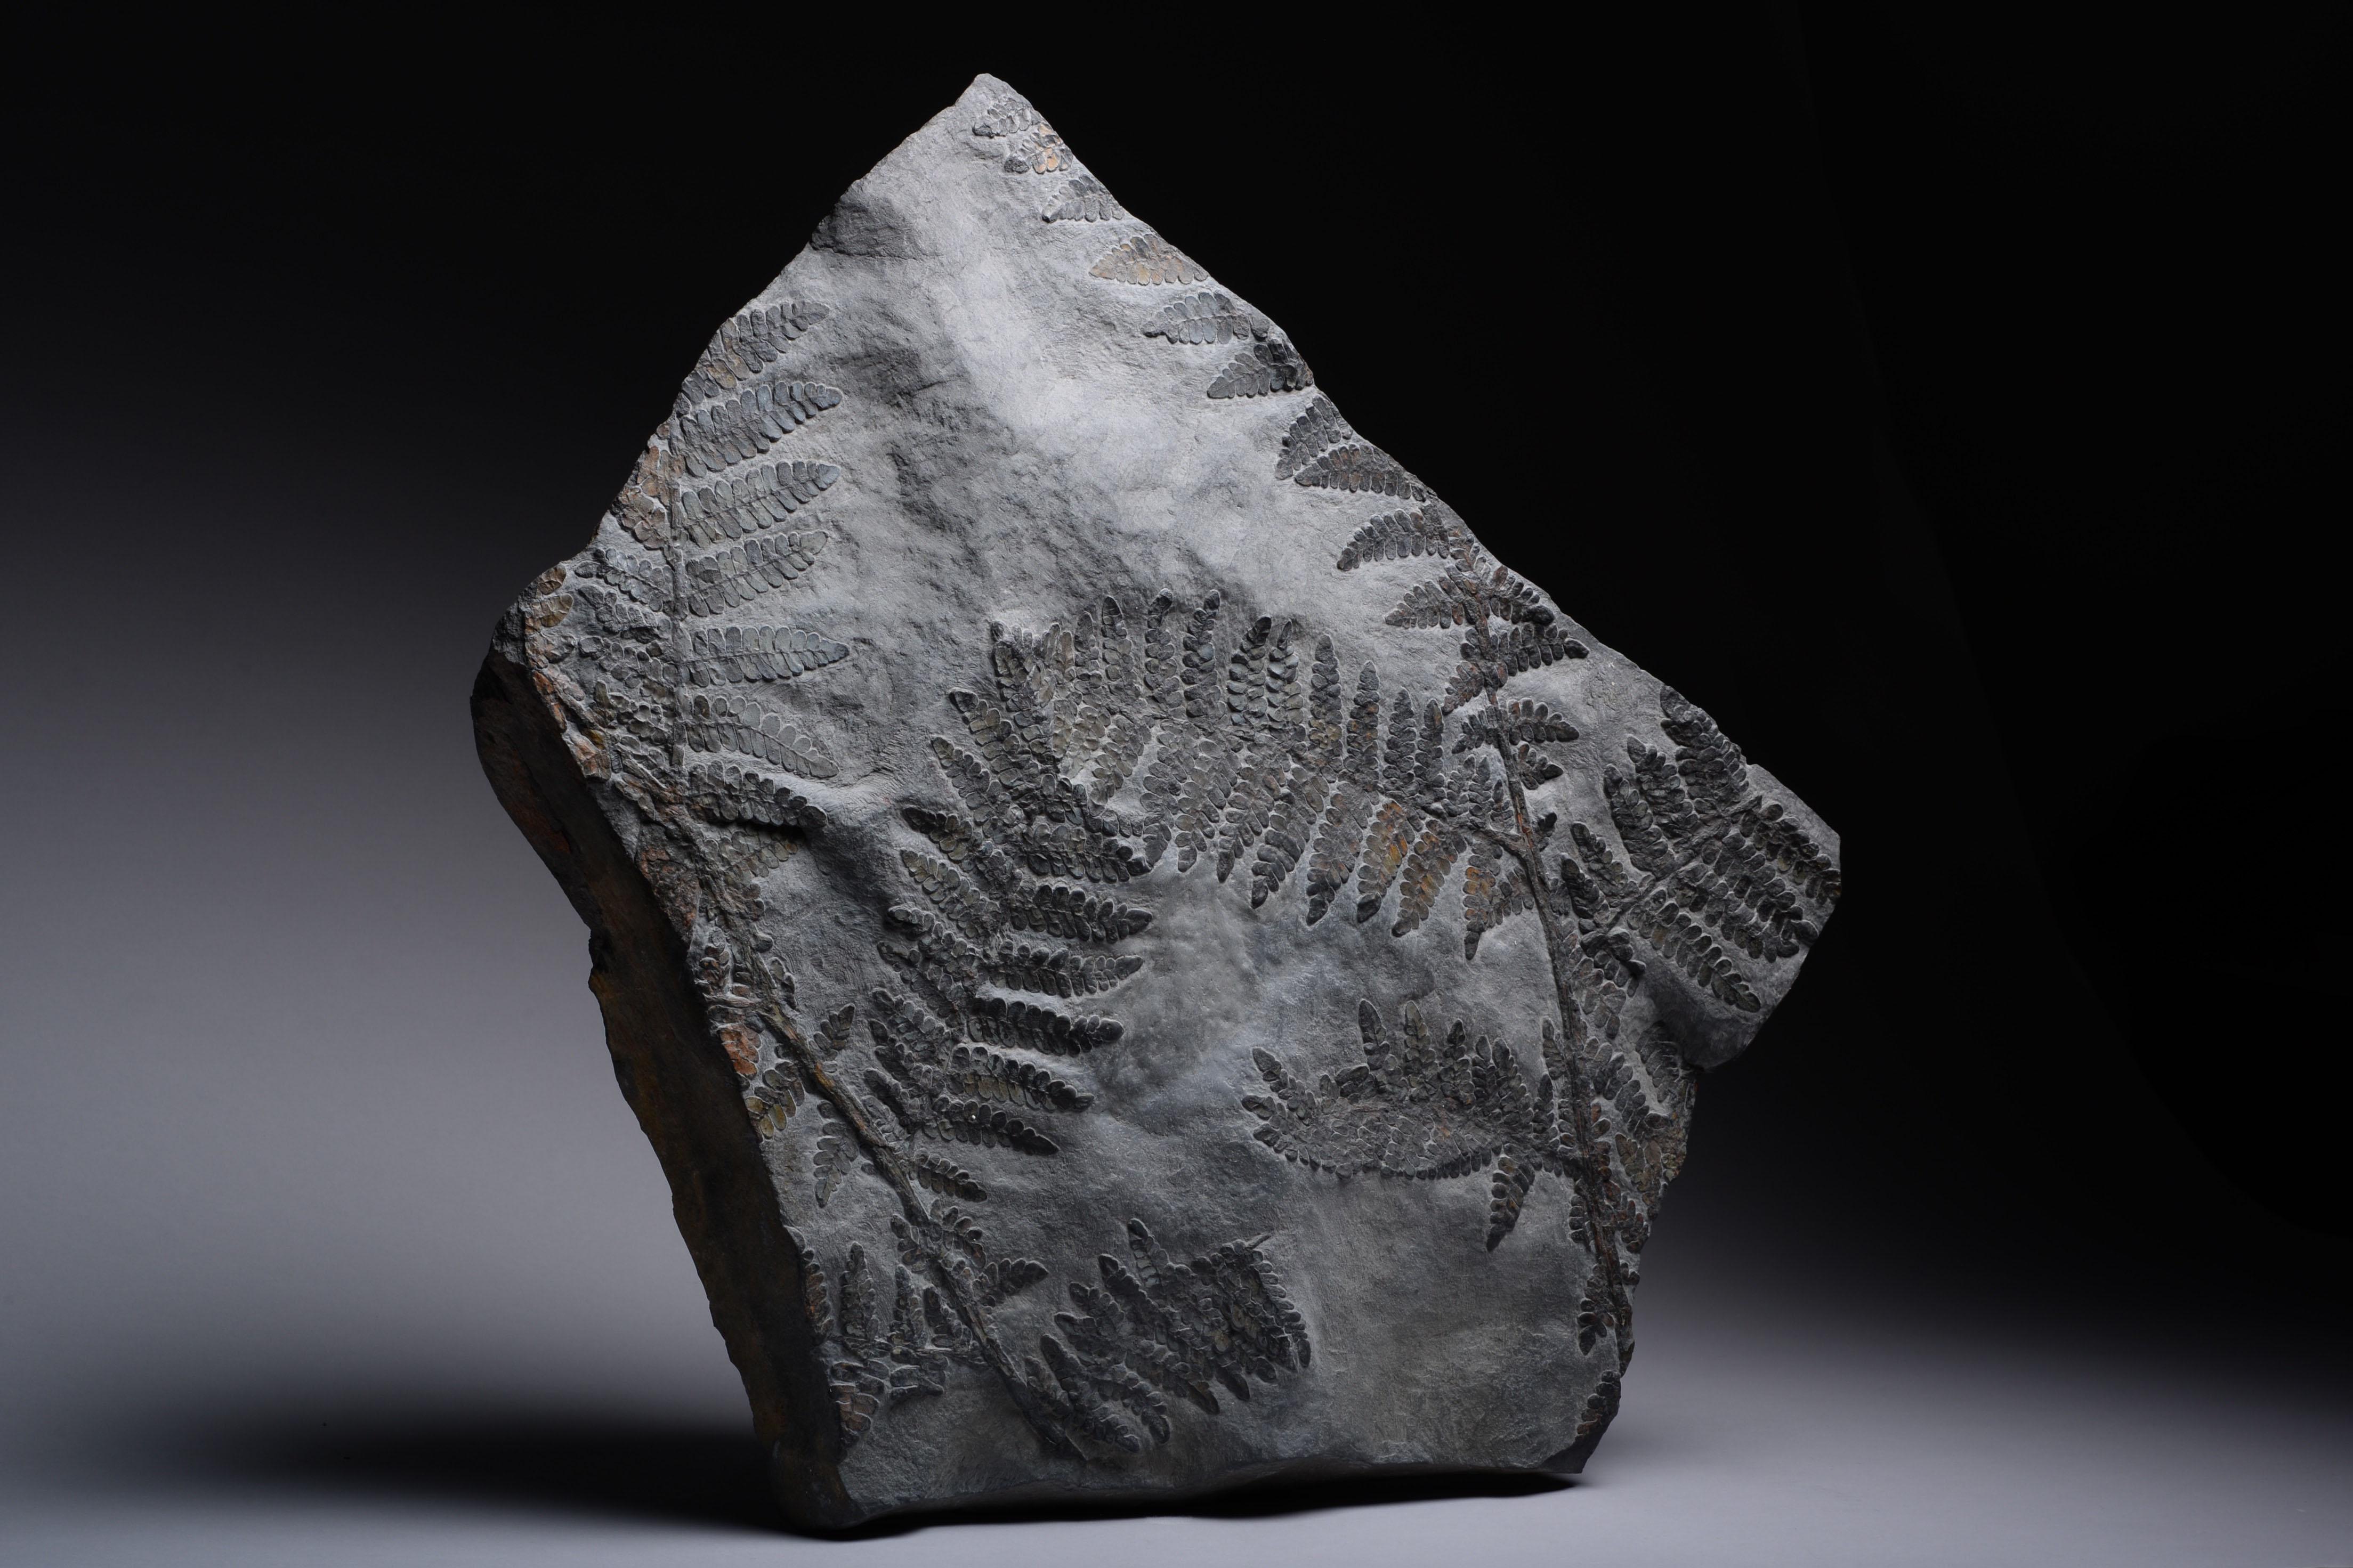 Fossilised seed fern (Neuropteris dussartii) from the Piesberg quarry, North-West Germany. Dating to the Carboniferous Period, 359-300 million years before present.

The fronds are spread out across the surface of the stone and fossilised in